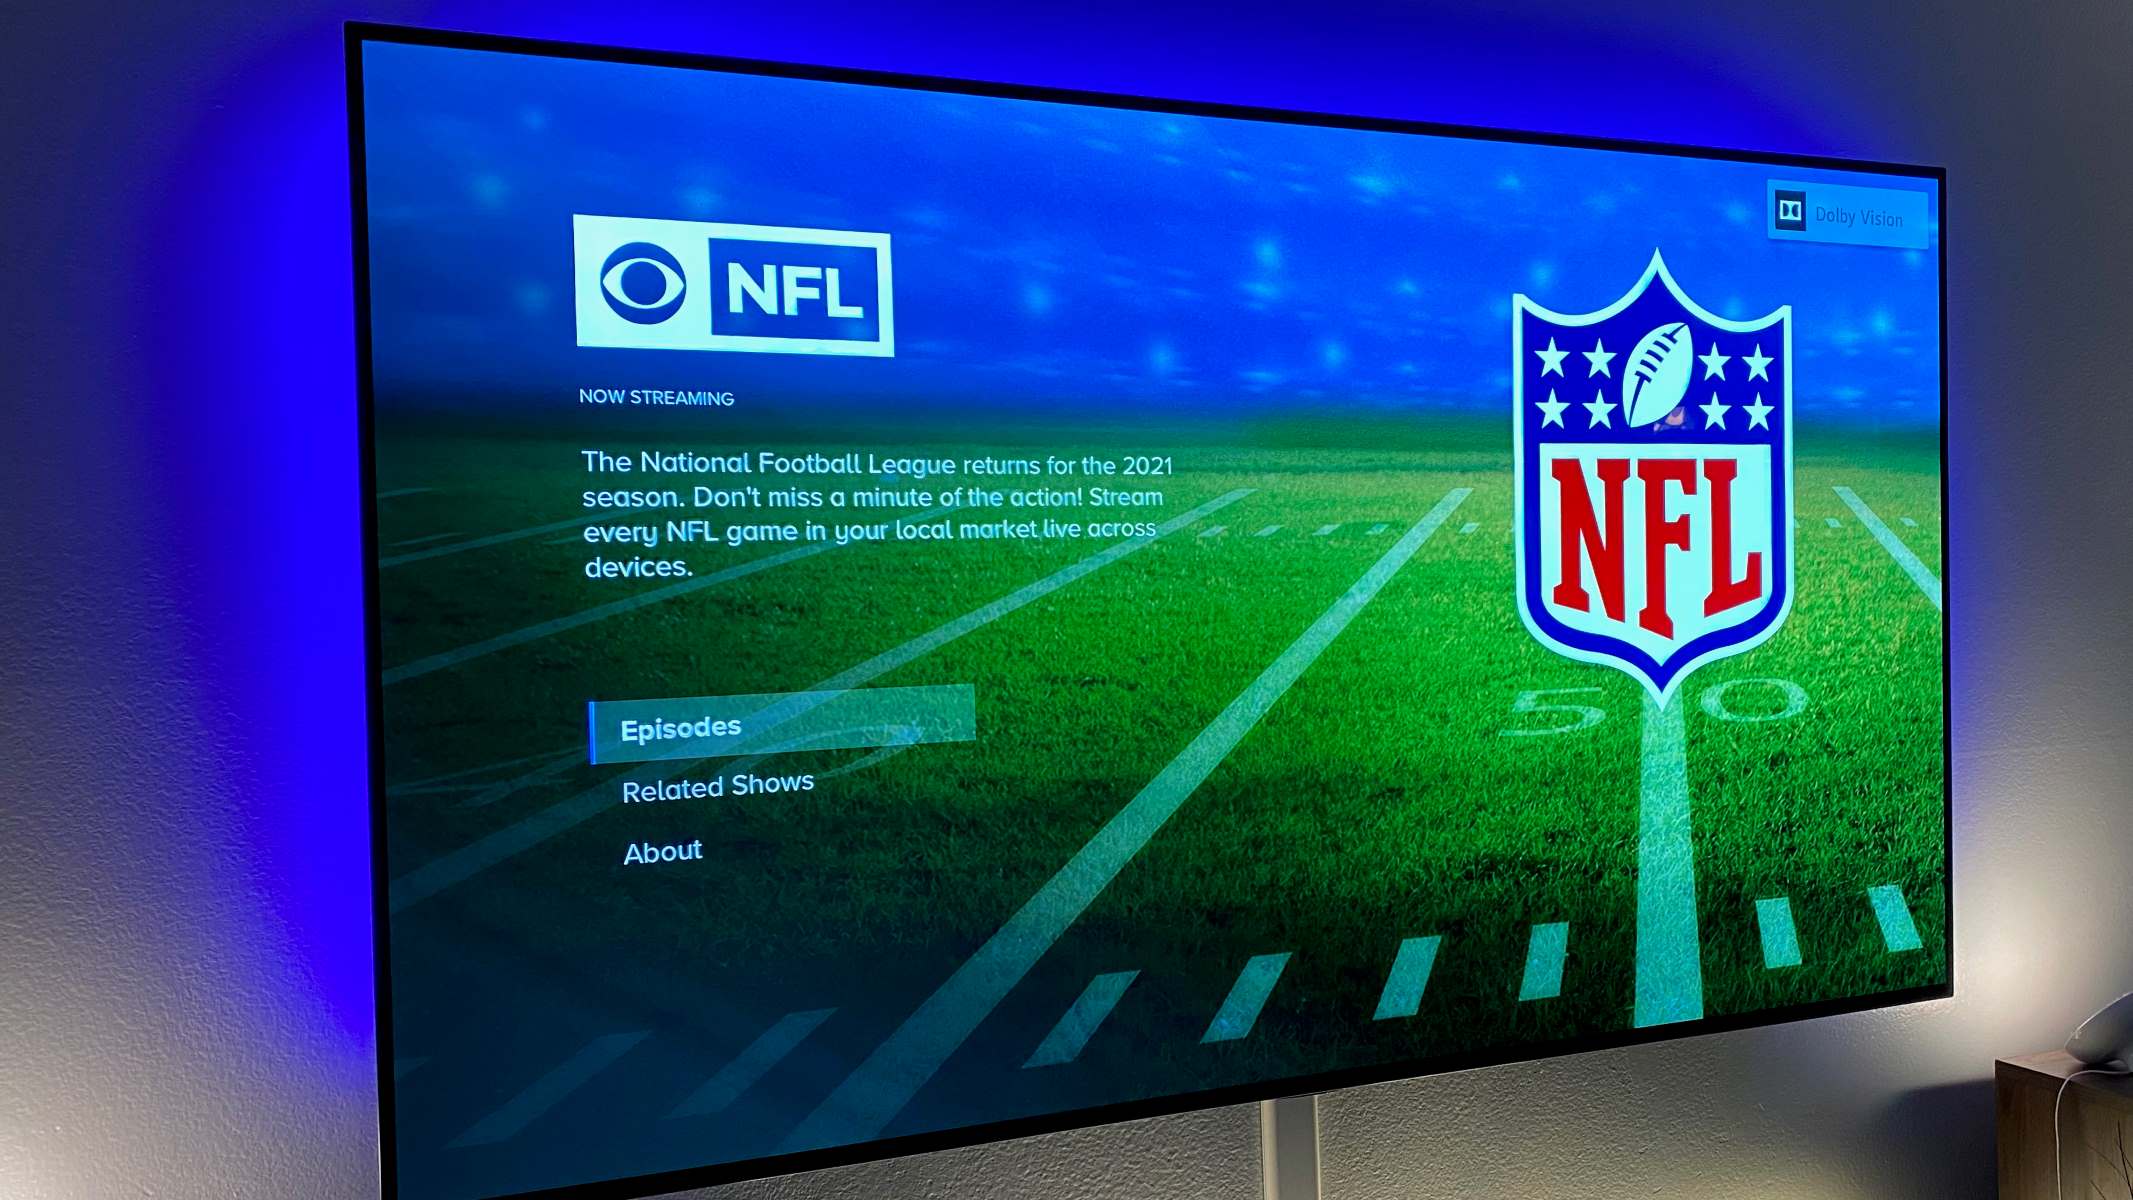 How To Watch NFL On Paramount